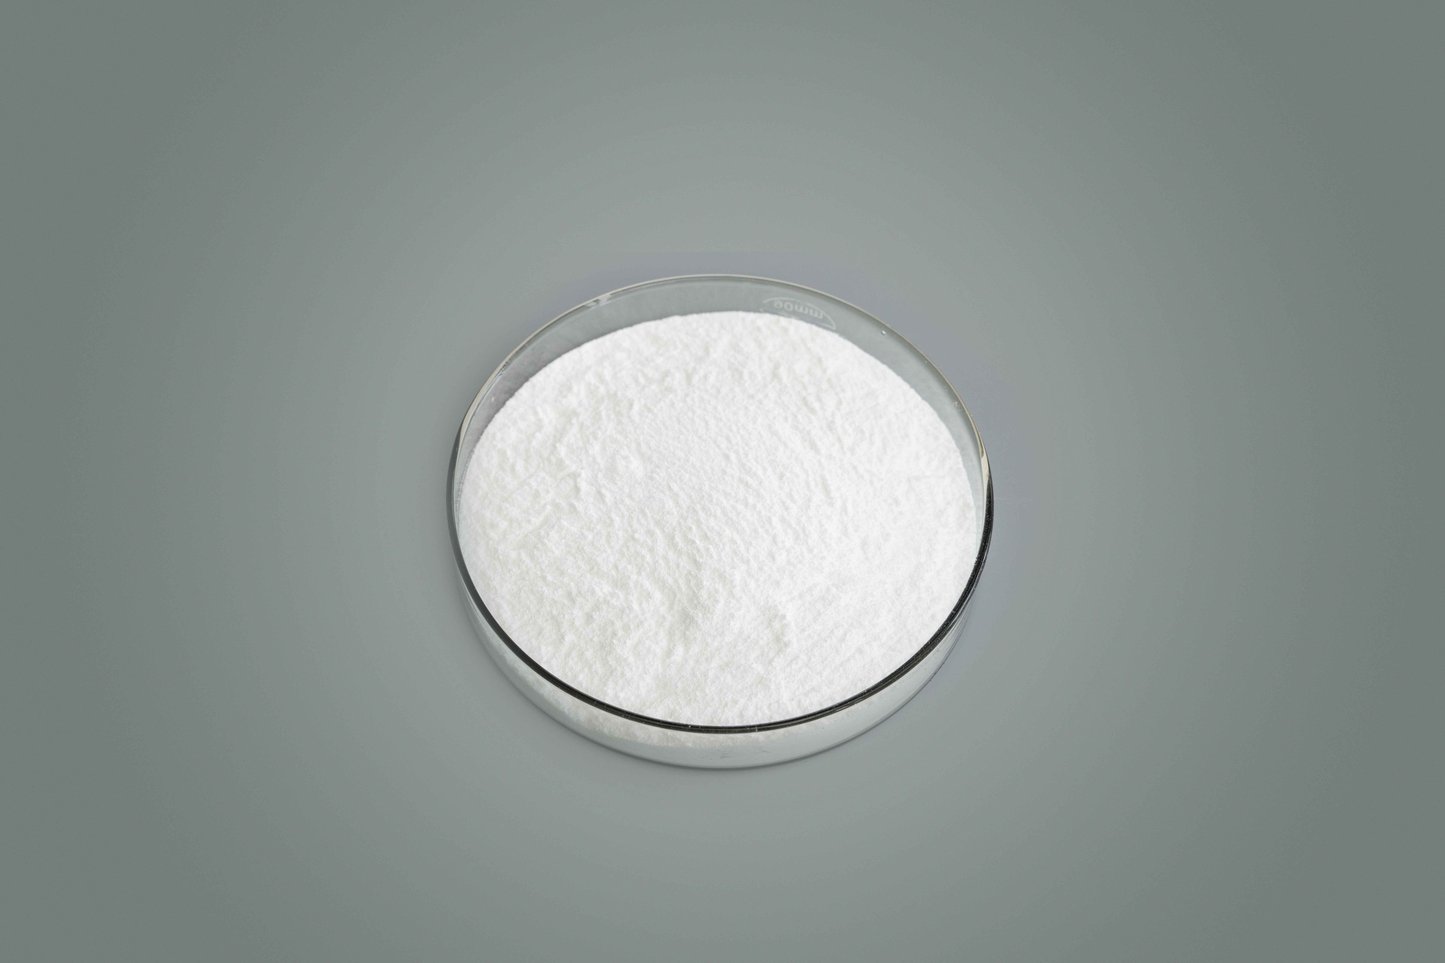 Food Additive Sodium Pyrophosphate Anhydrous